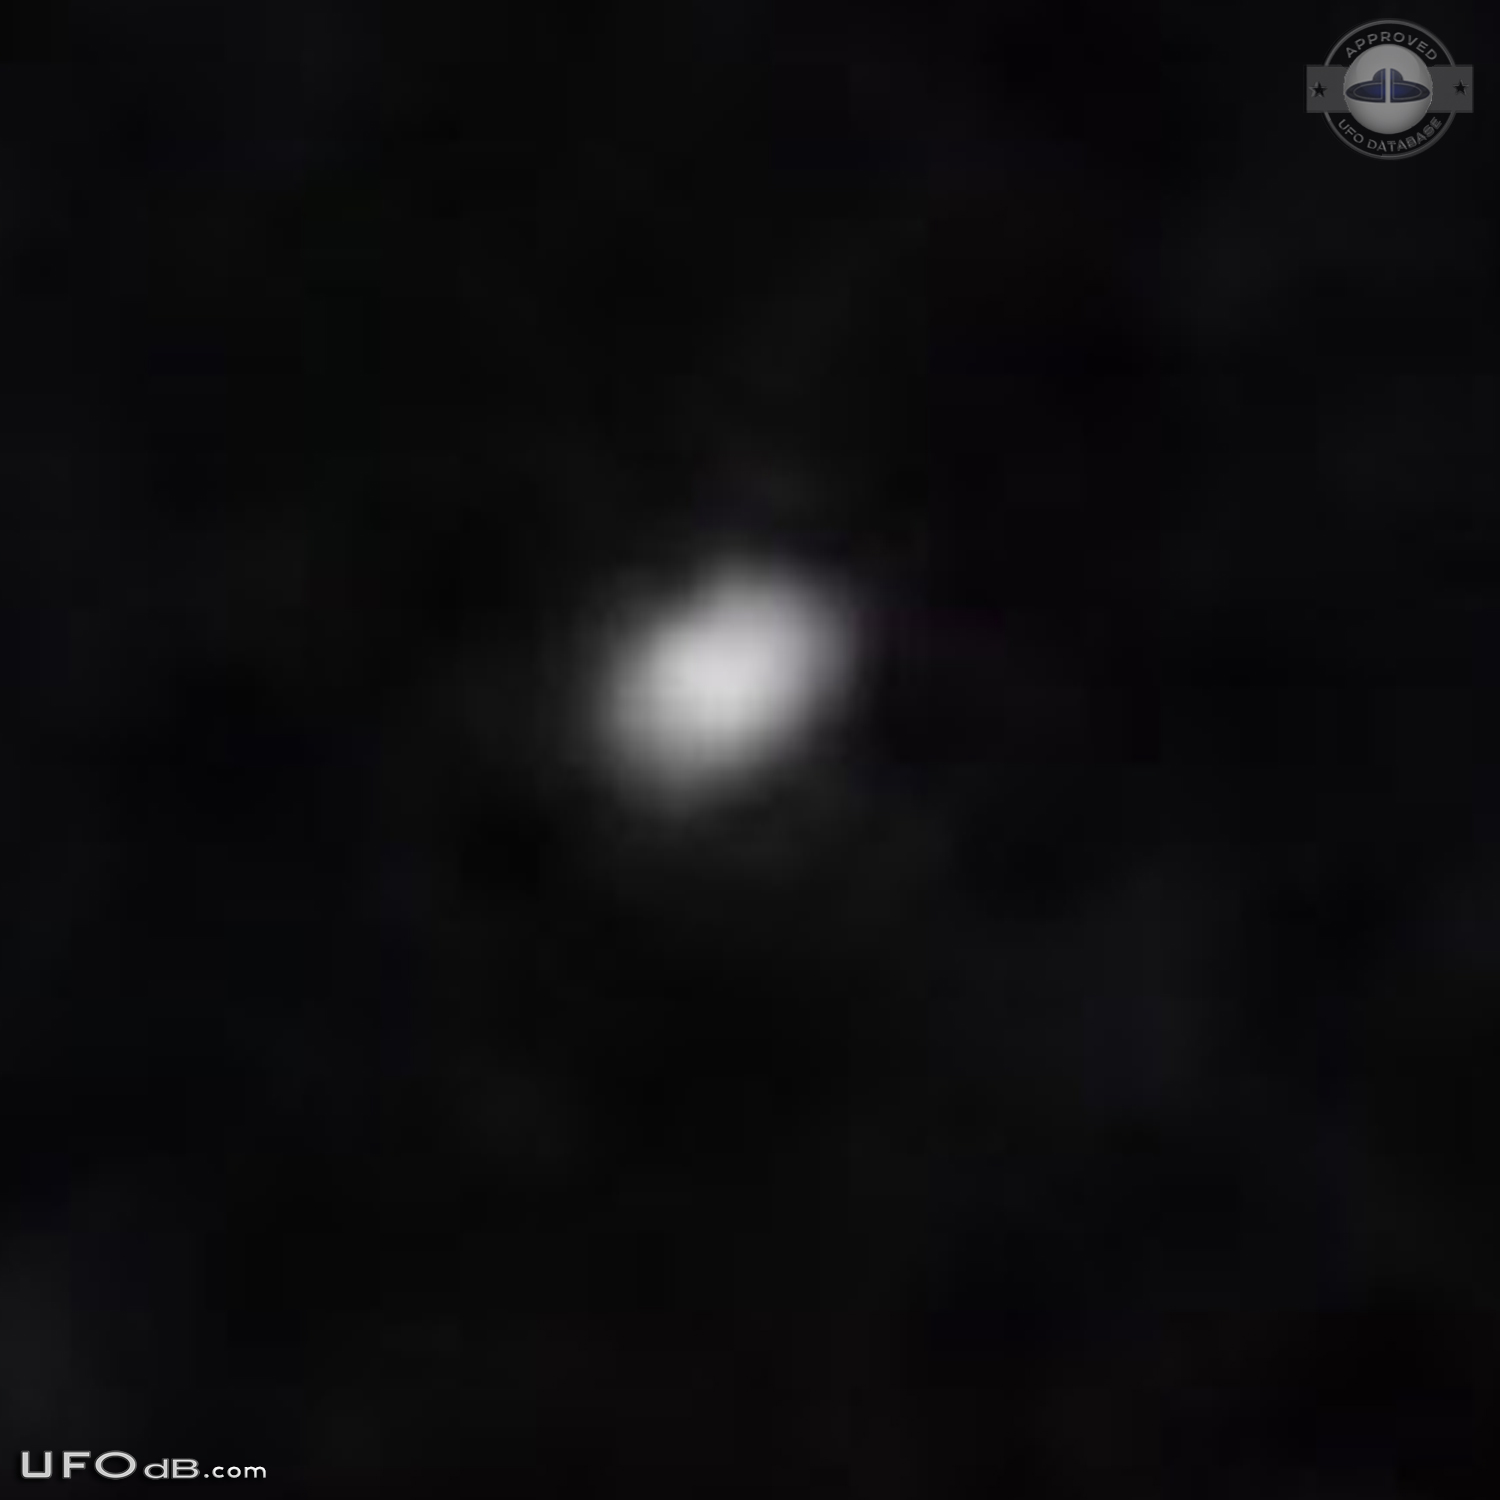 UFO with tentacles with reddish color seen over Magee, Mississipi 2014 UFO Picture #561-7